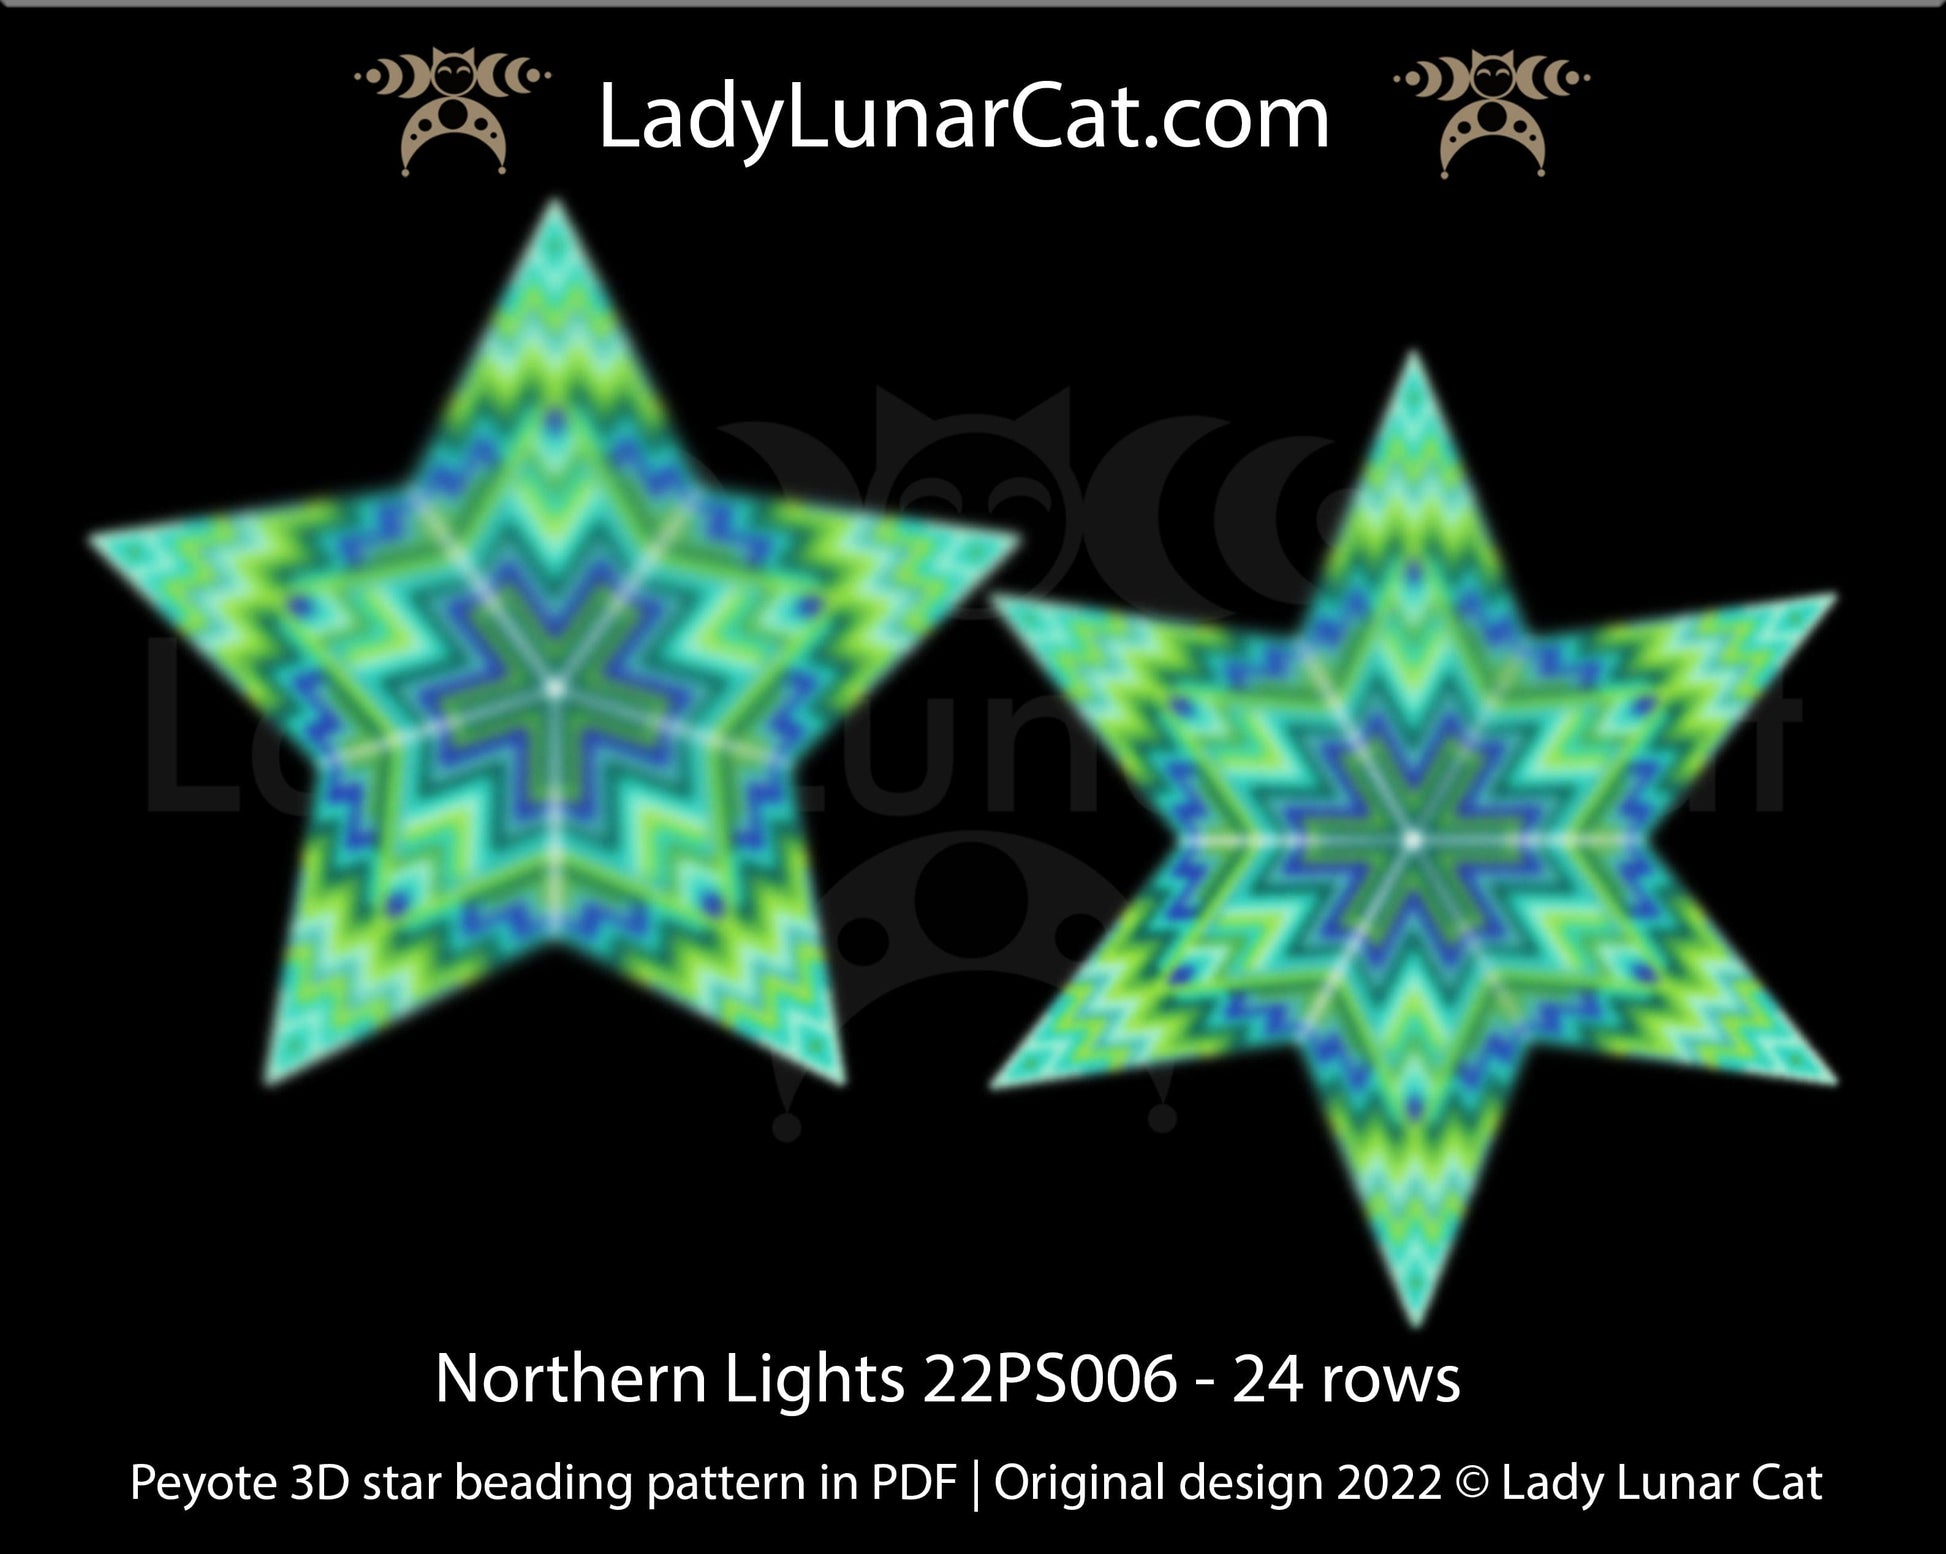 Peyote star pattern for beading - Northern Lights 22PS006 24 rows LadyLunarCat